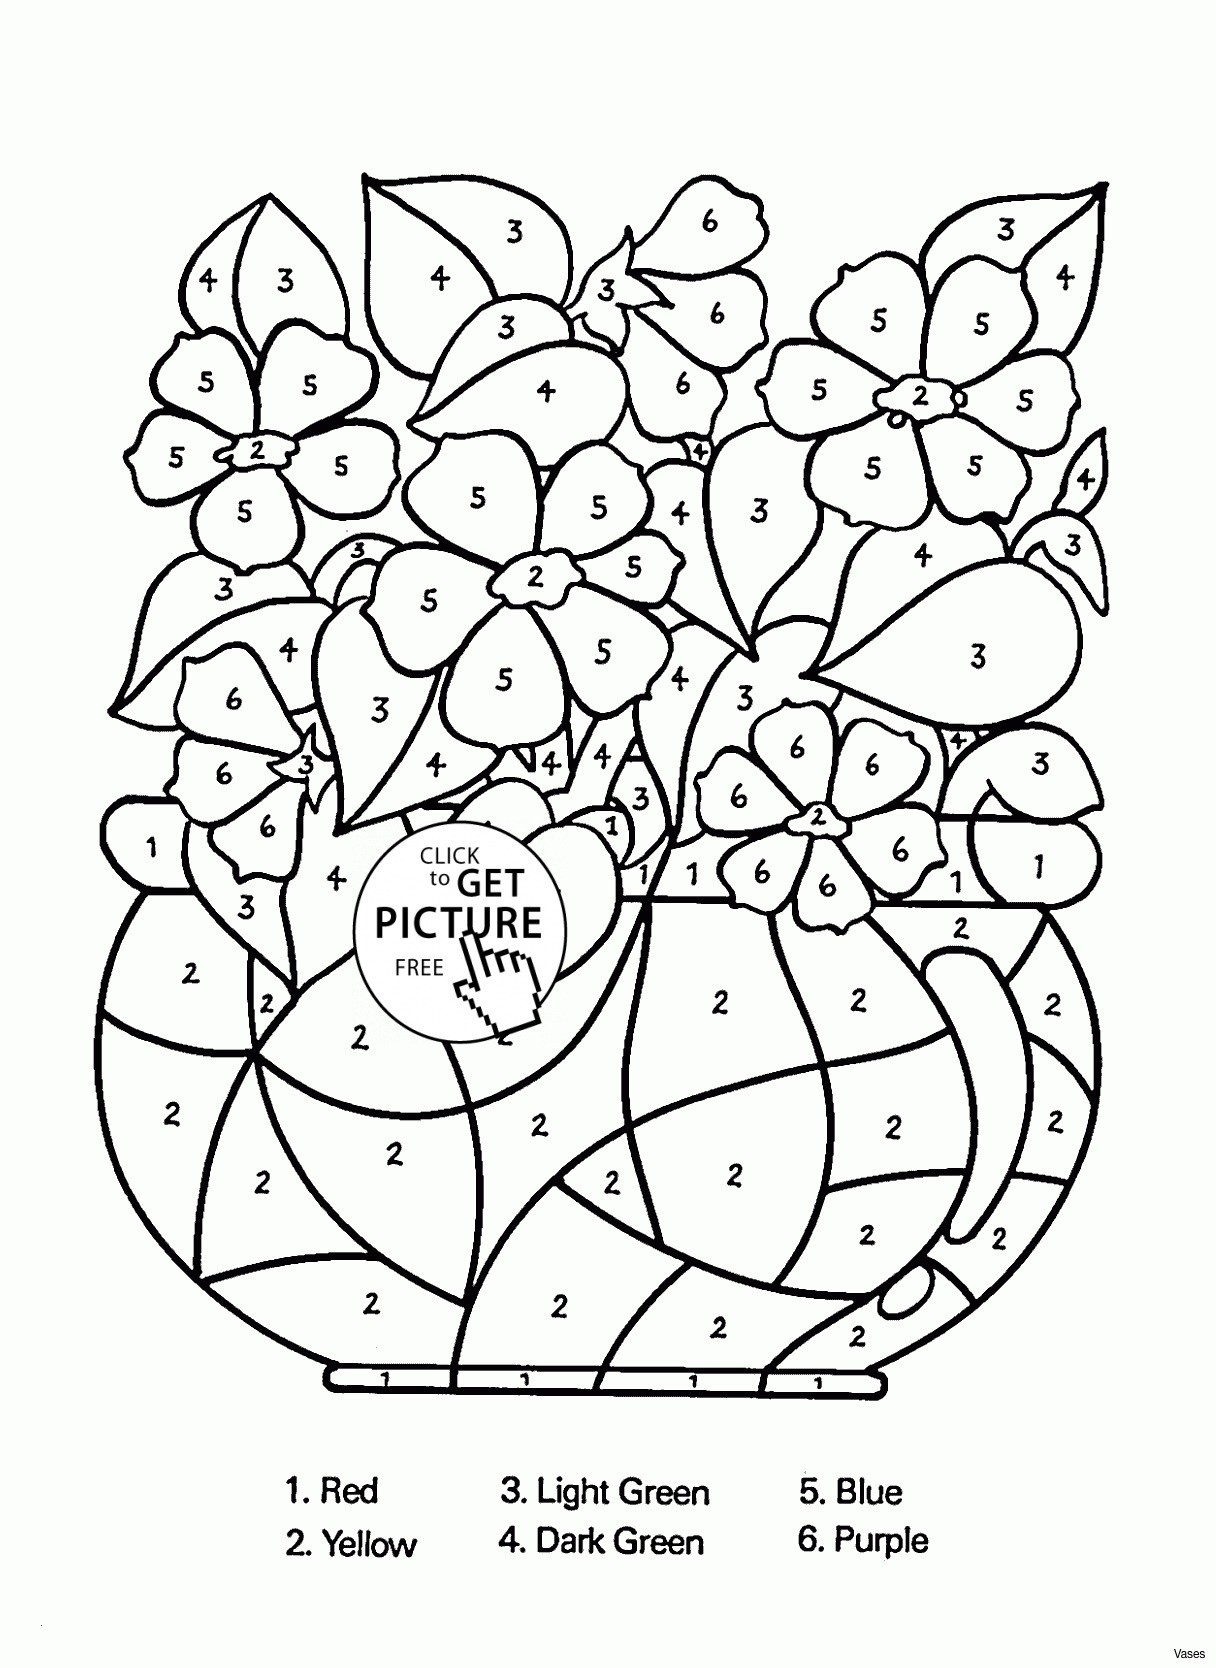 Coloring Printable Unique Coloring Pages for Kids Printable Beautiful Coloring Printables 0d